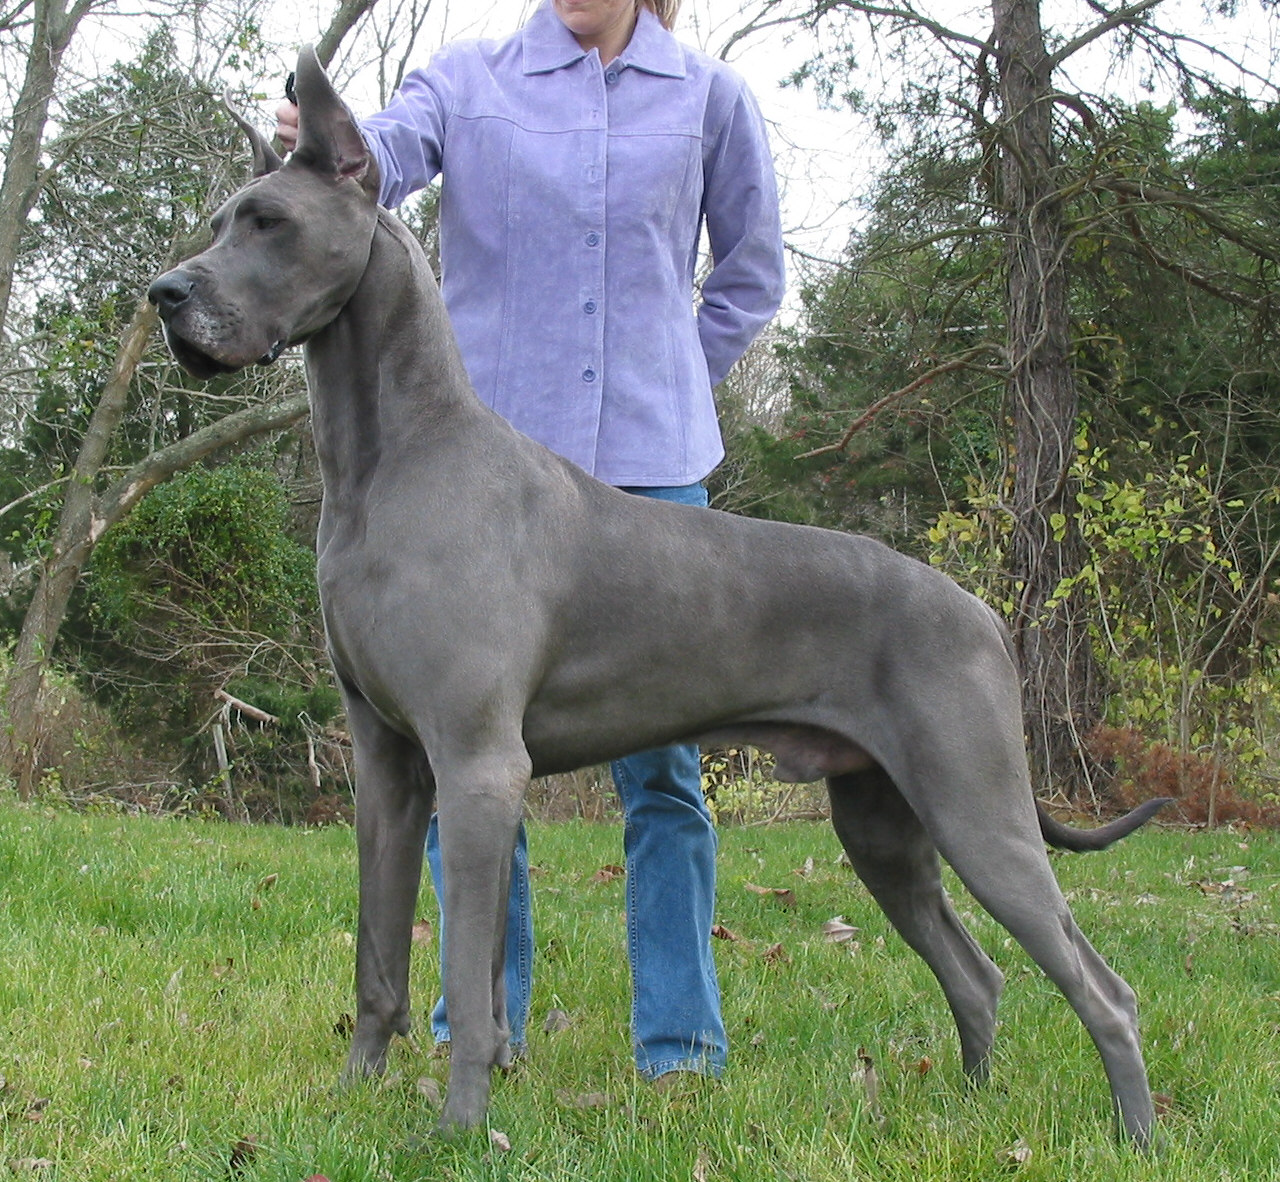 Chien-gris Dog: Chien Gris Big Dogs Versus Big Acting Dogs Breed